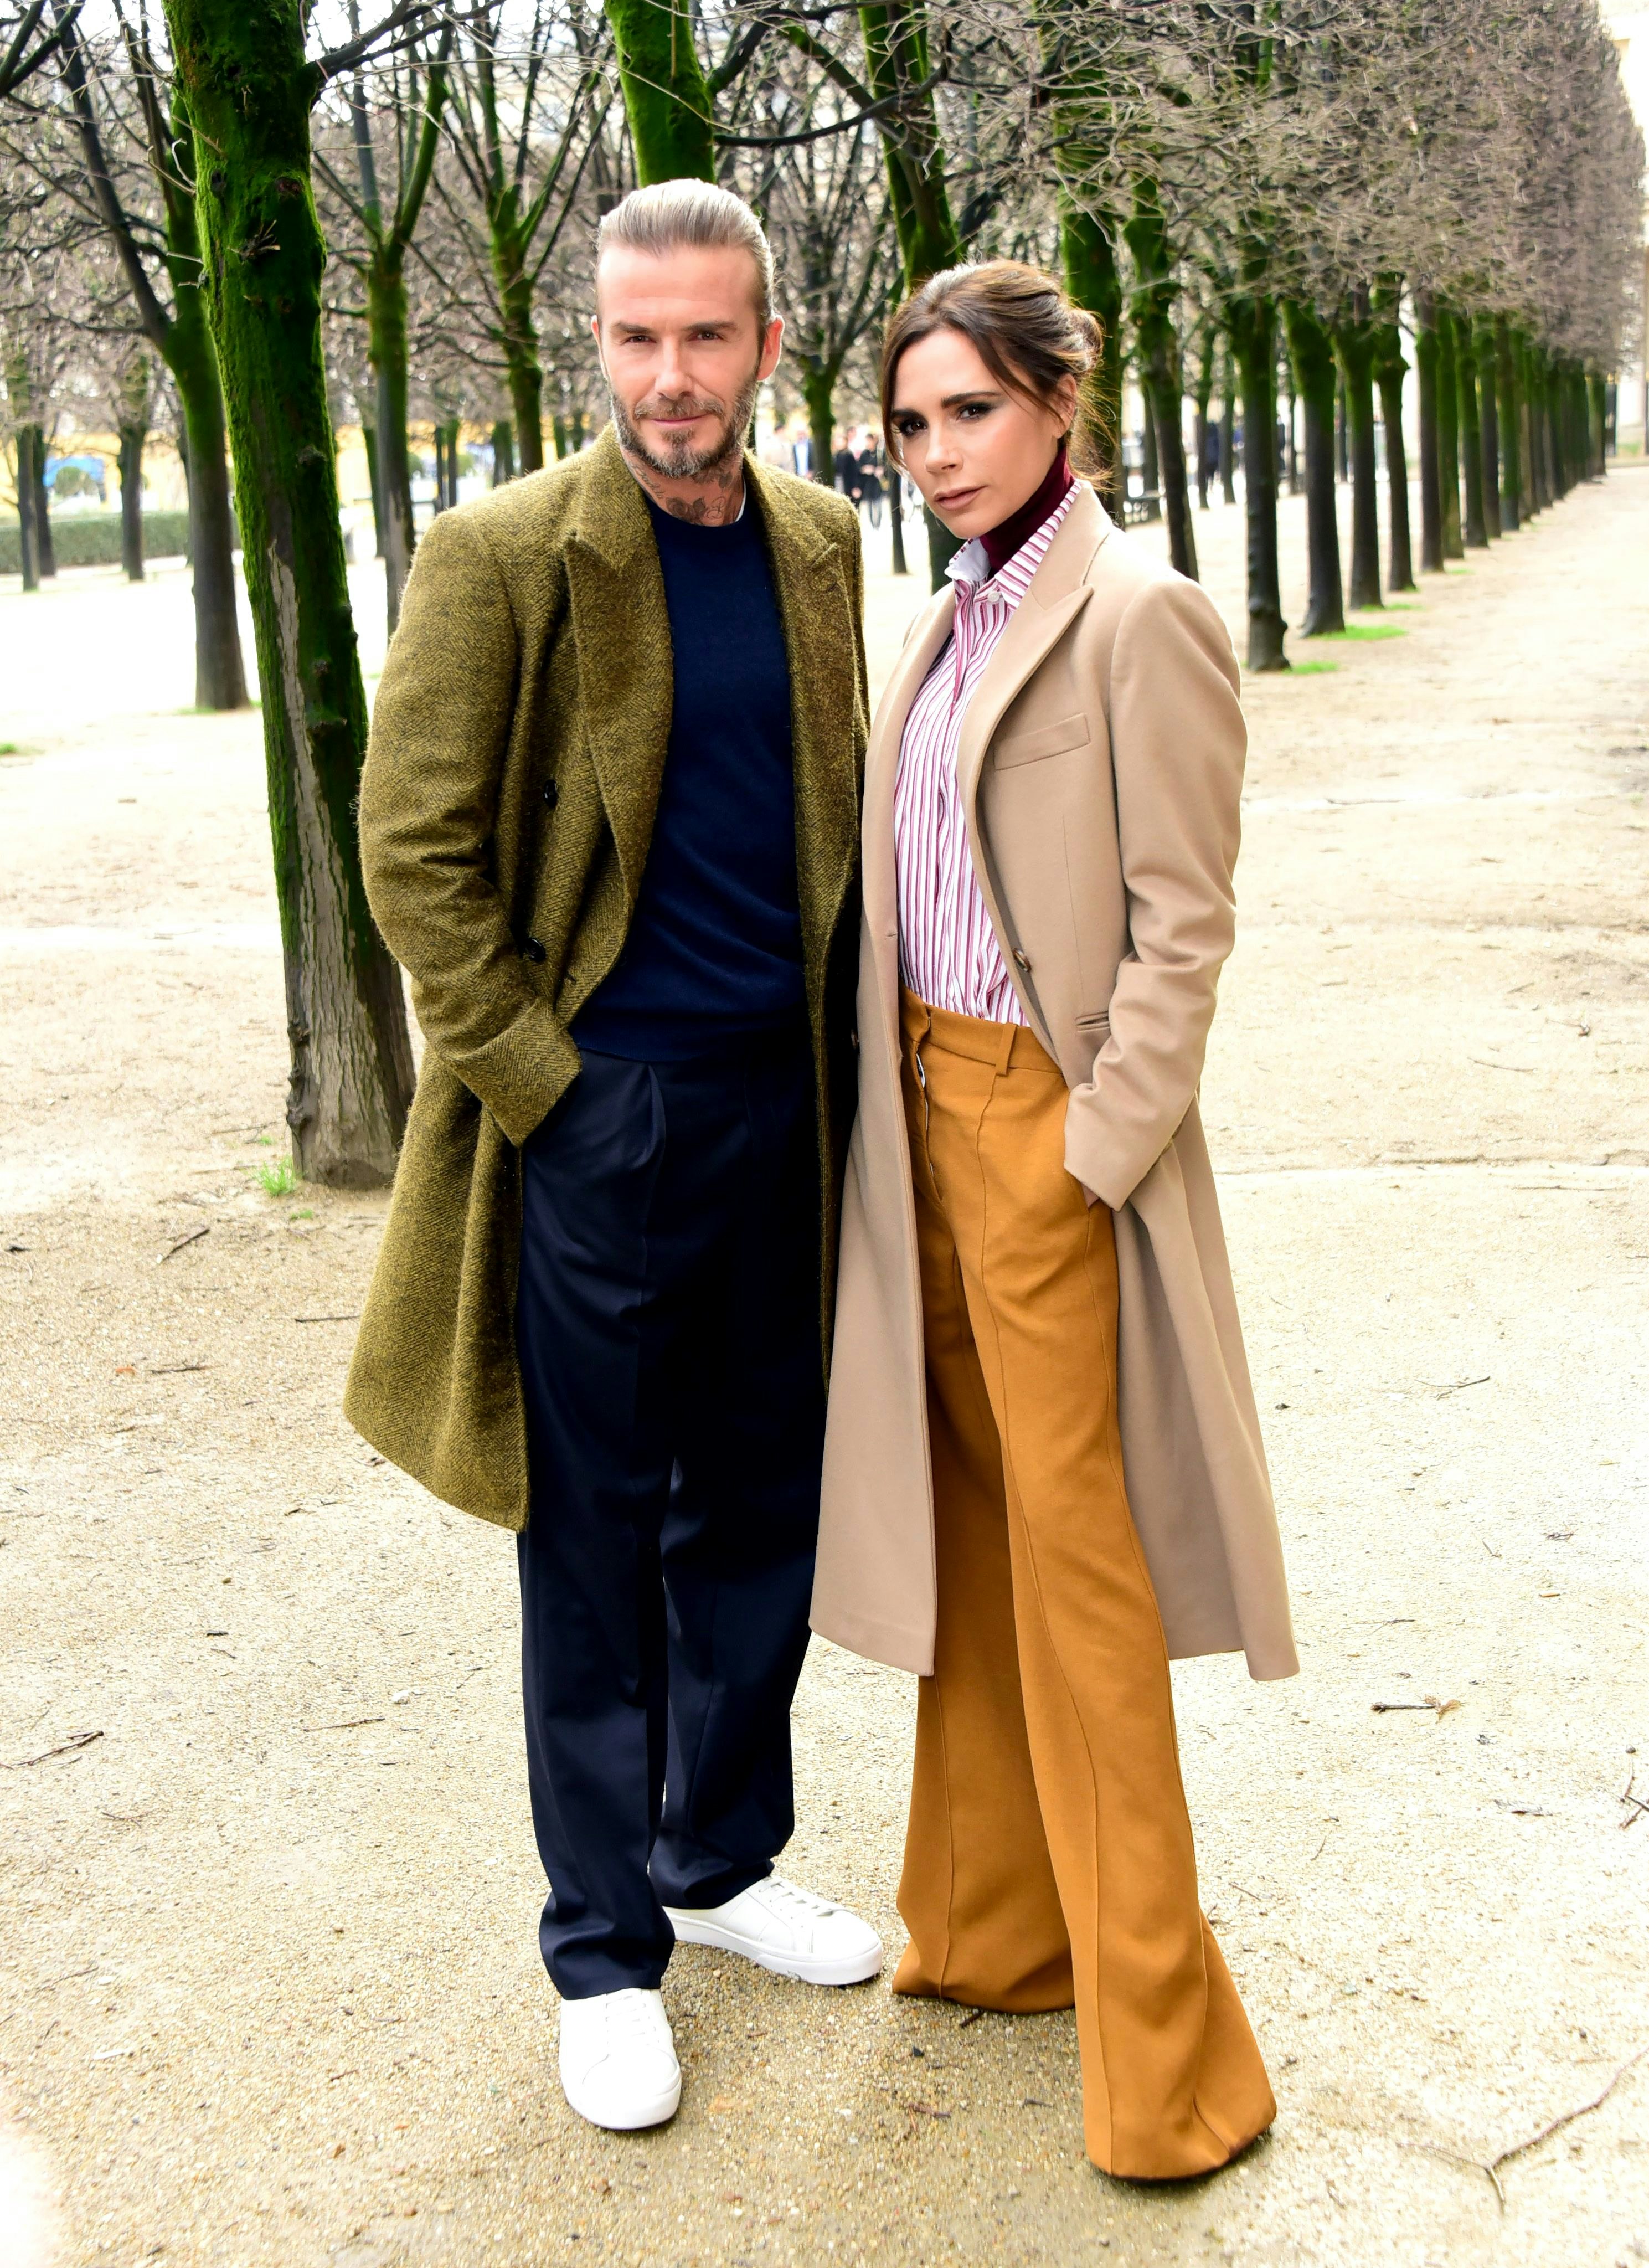 Victoria Beckham’s Obsession With Turtlenecks Has Got Us Thinking